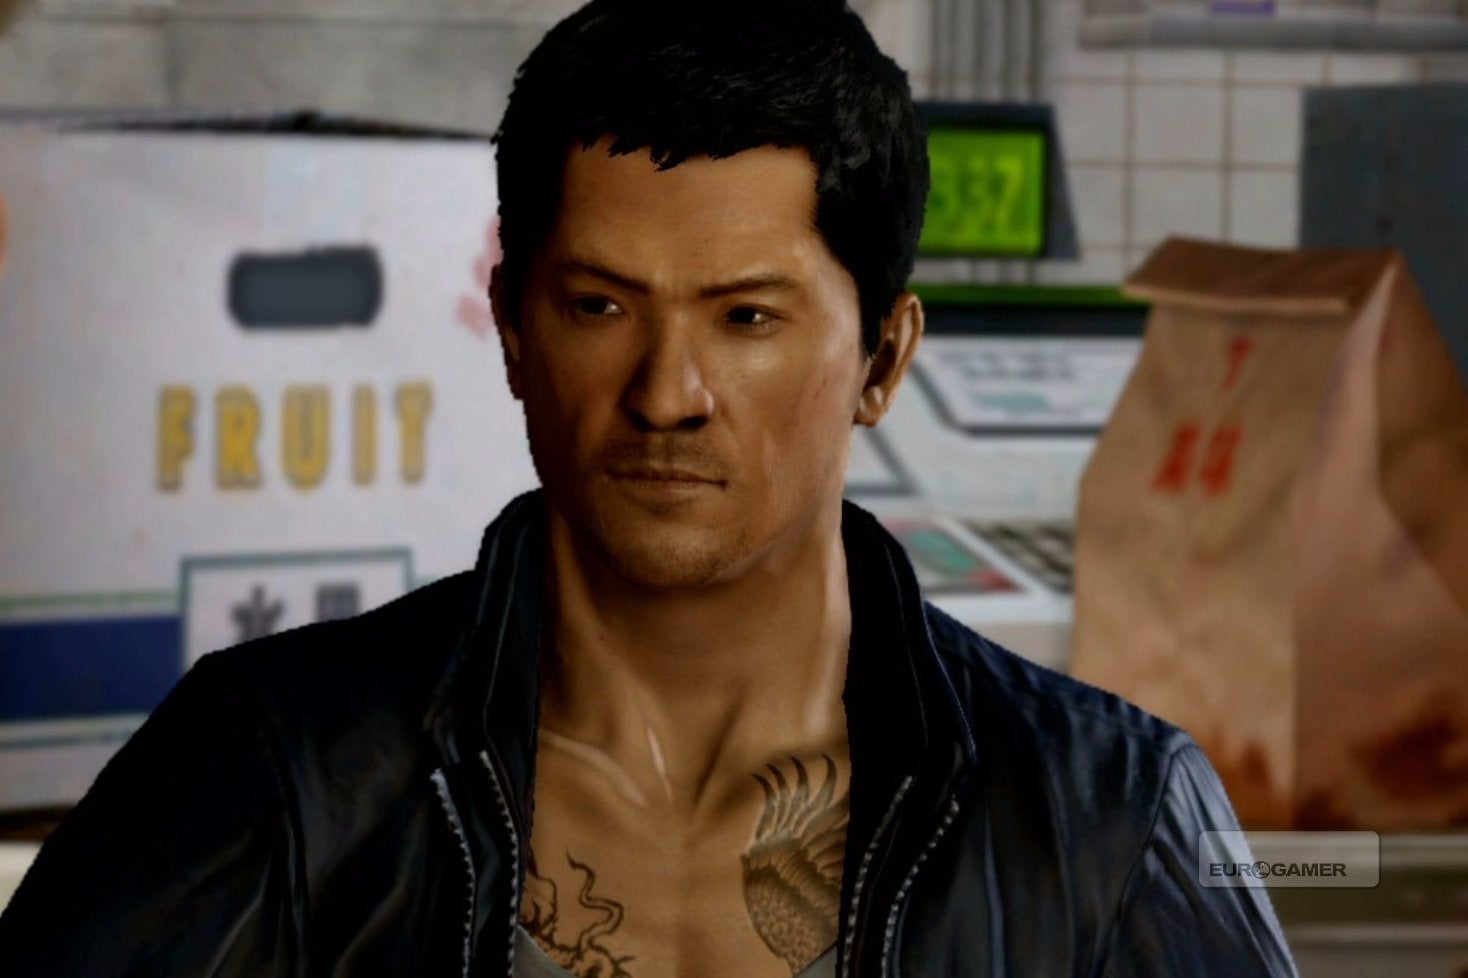 Image for Sounds like Sleeping Dogs developer United Front Games has shut down